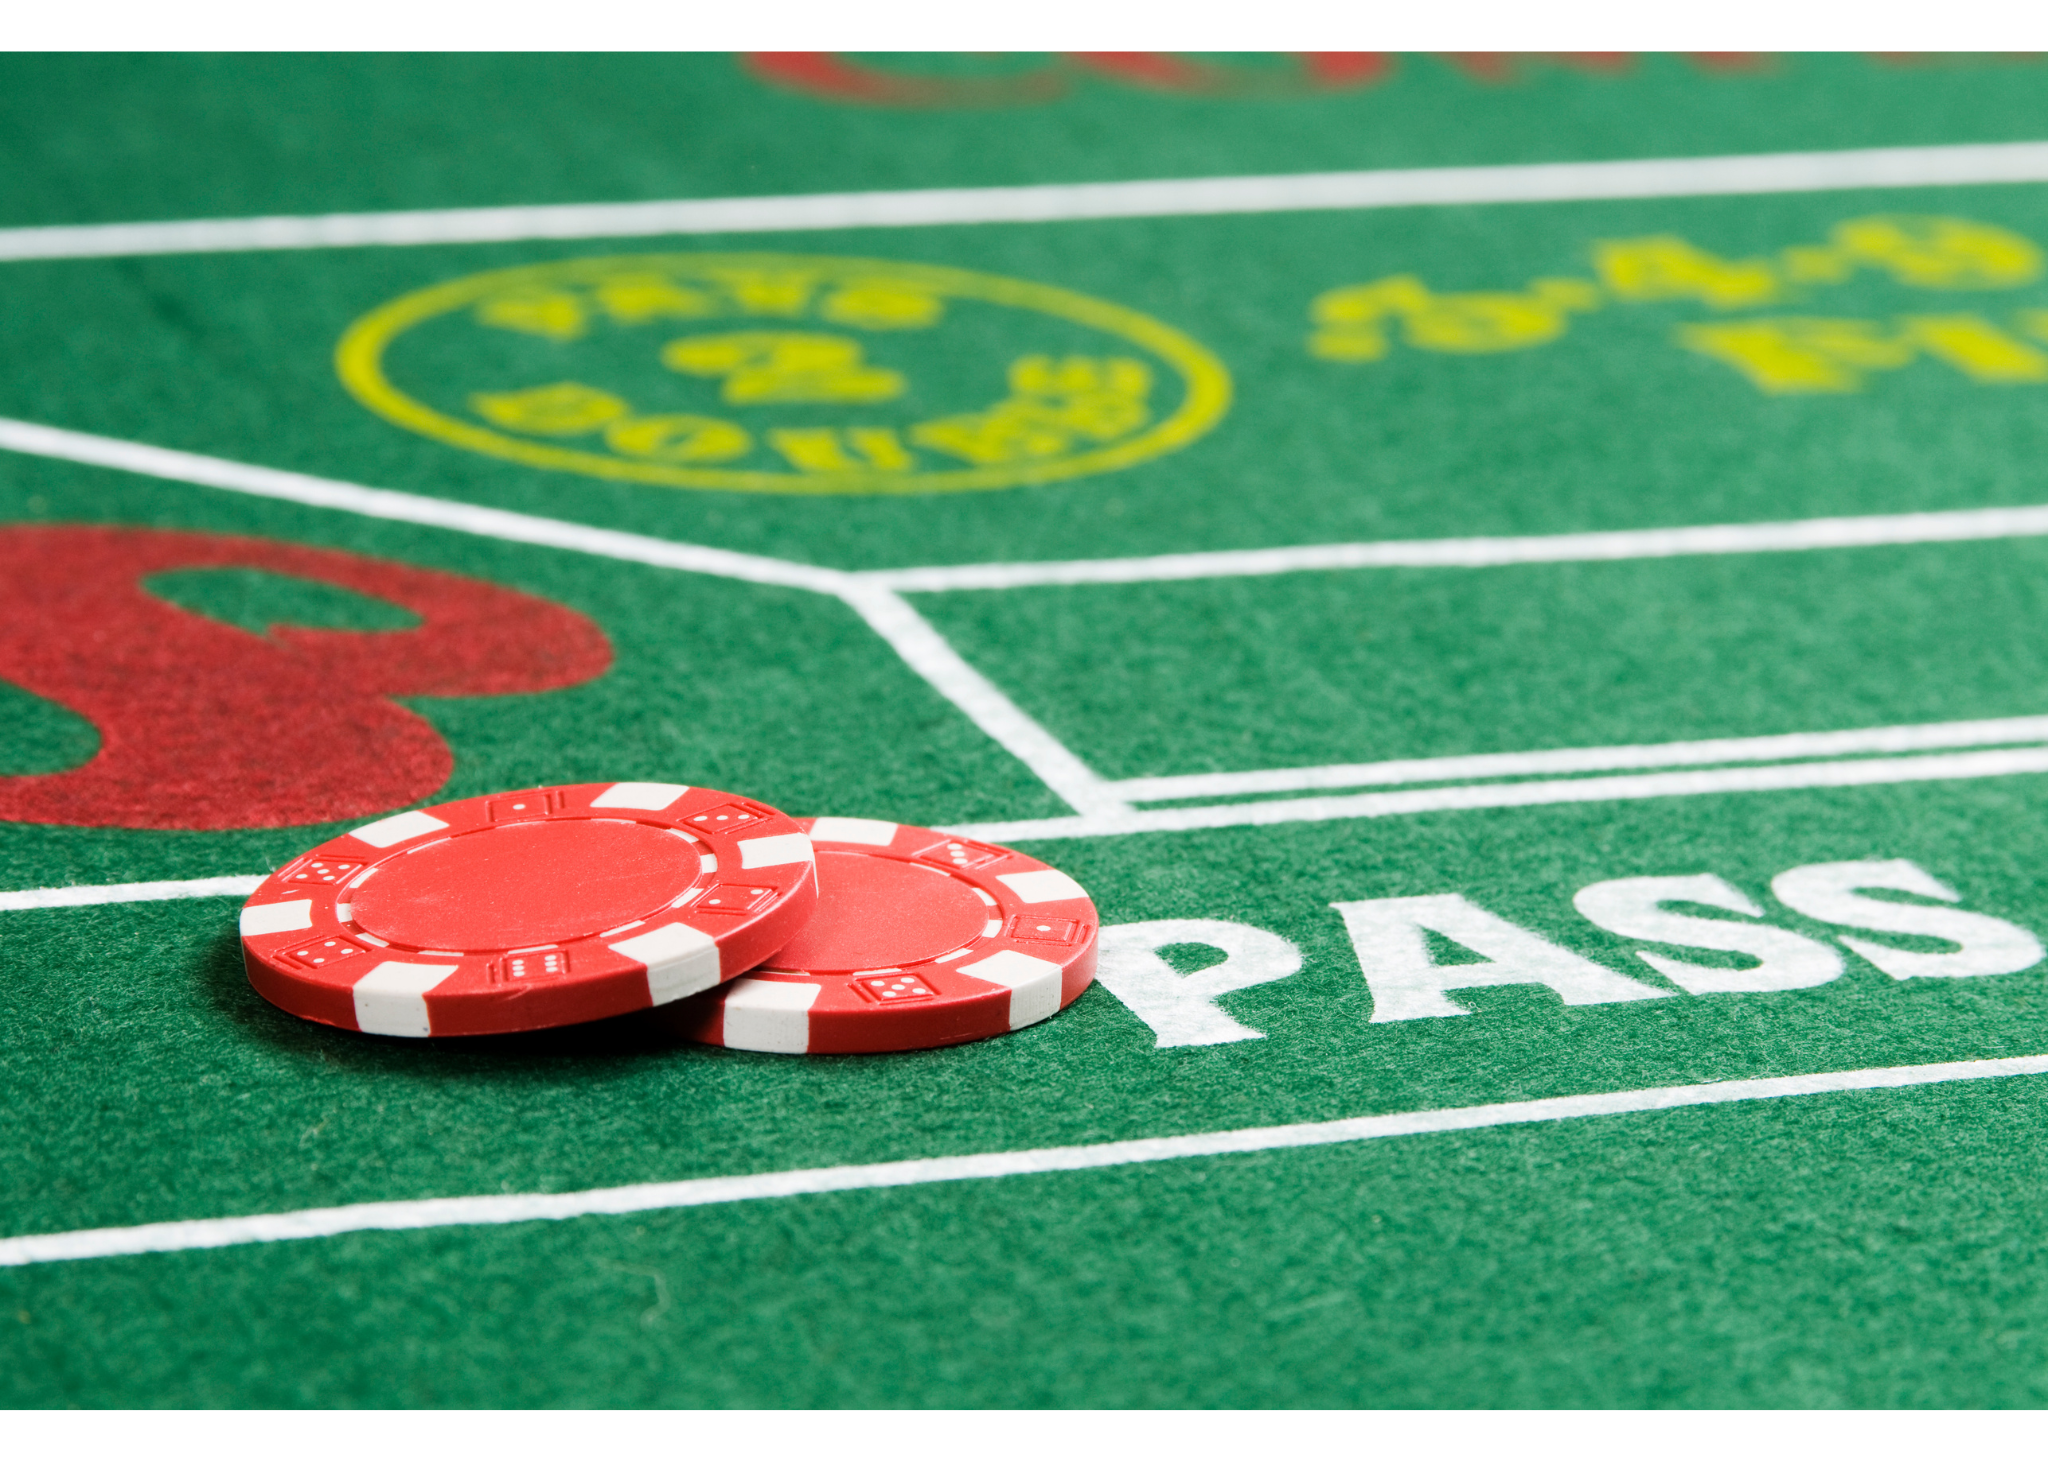 Find out about the risks and repercussions that office gambling can have for your business.